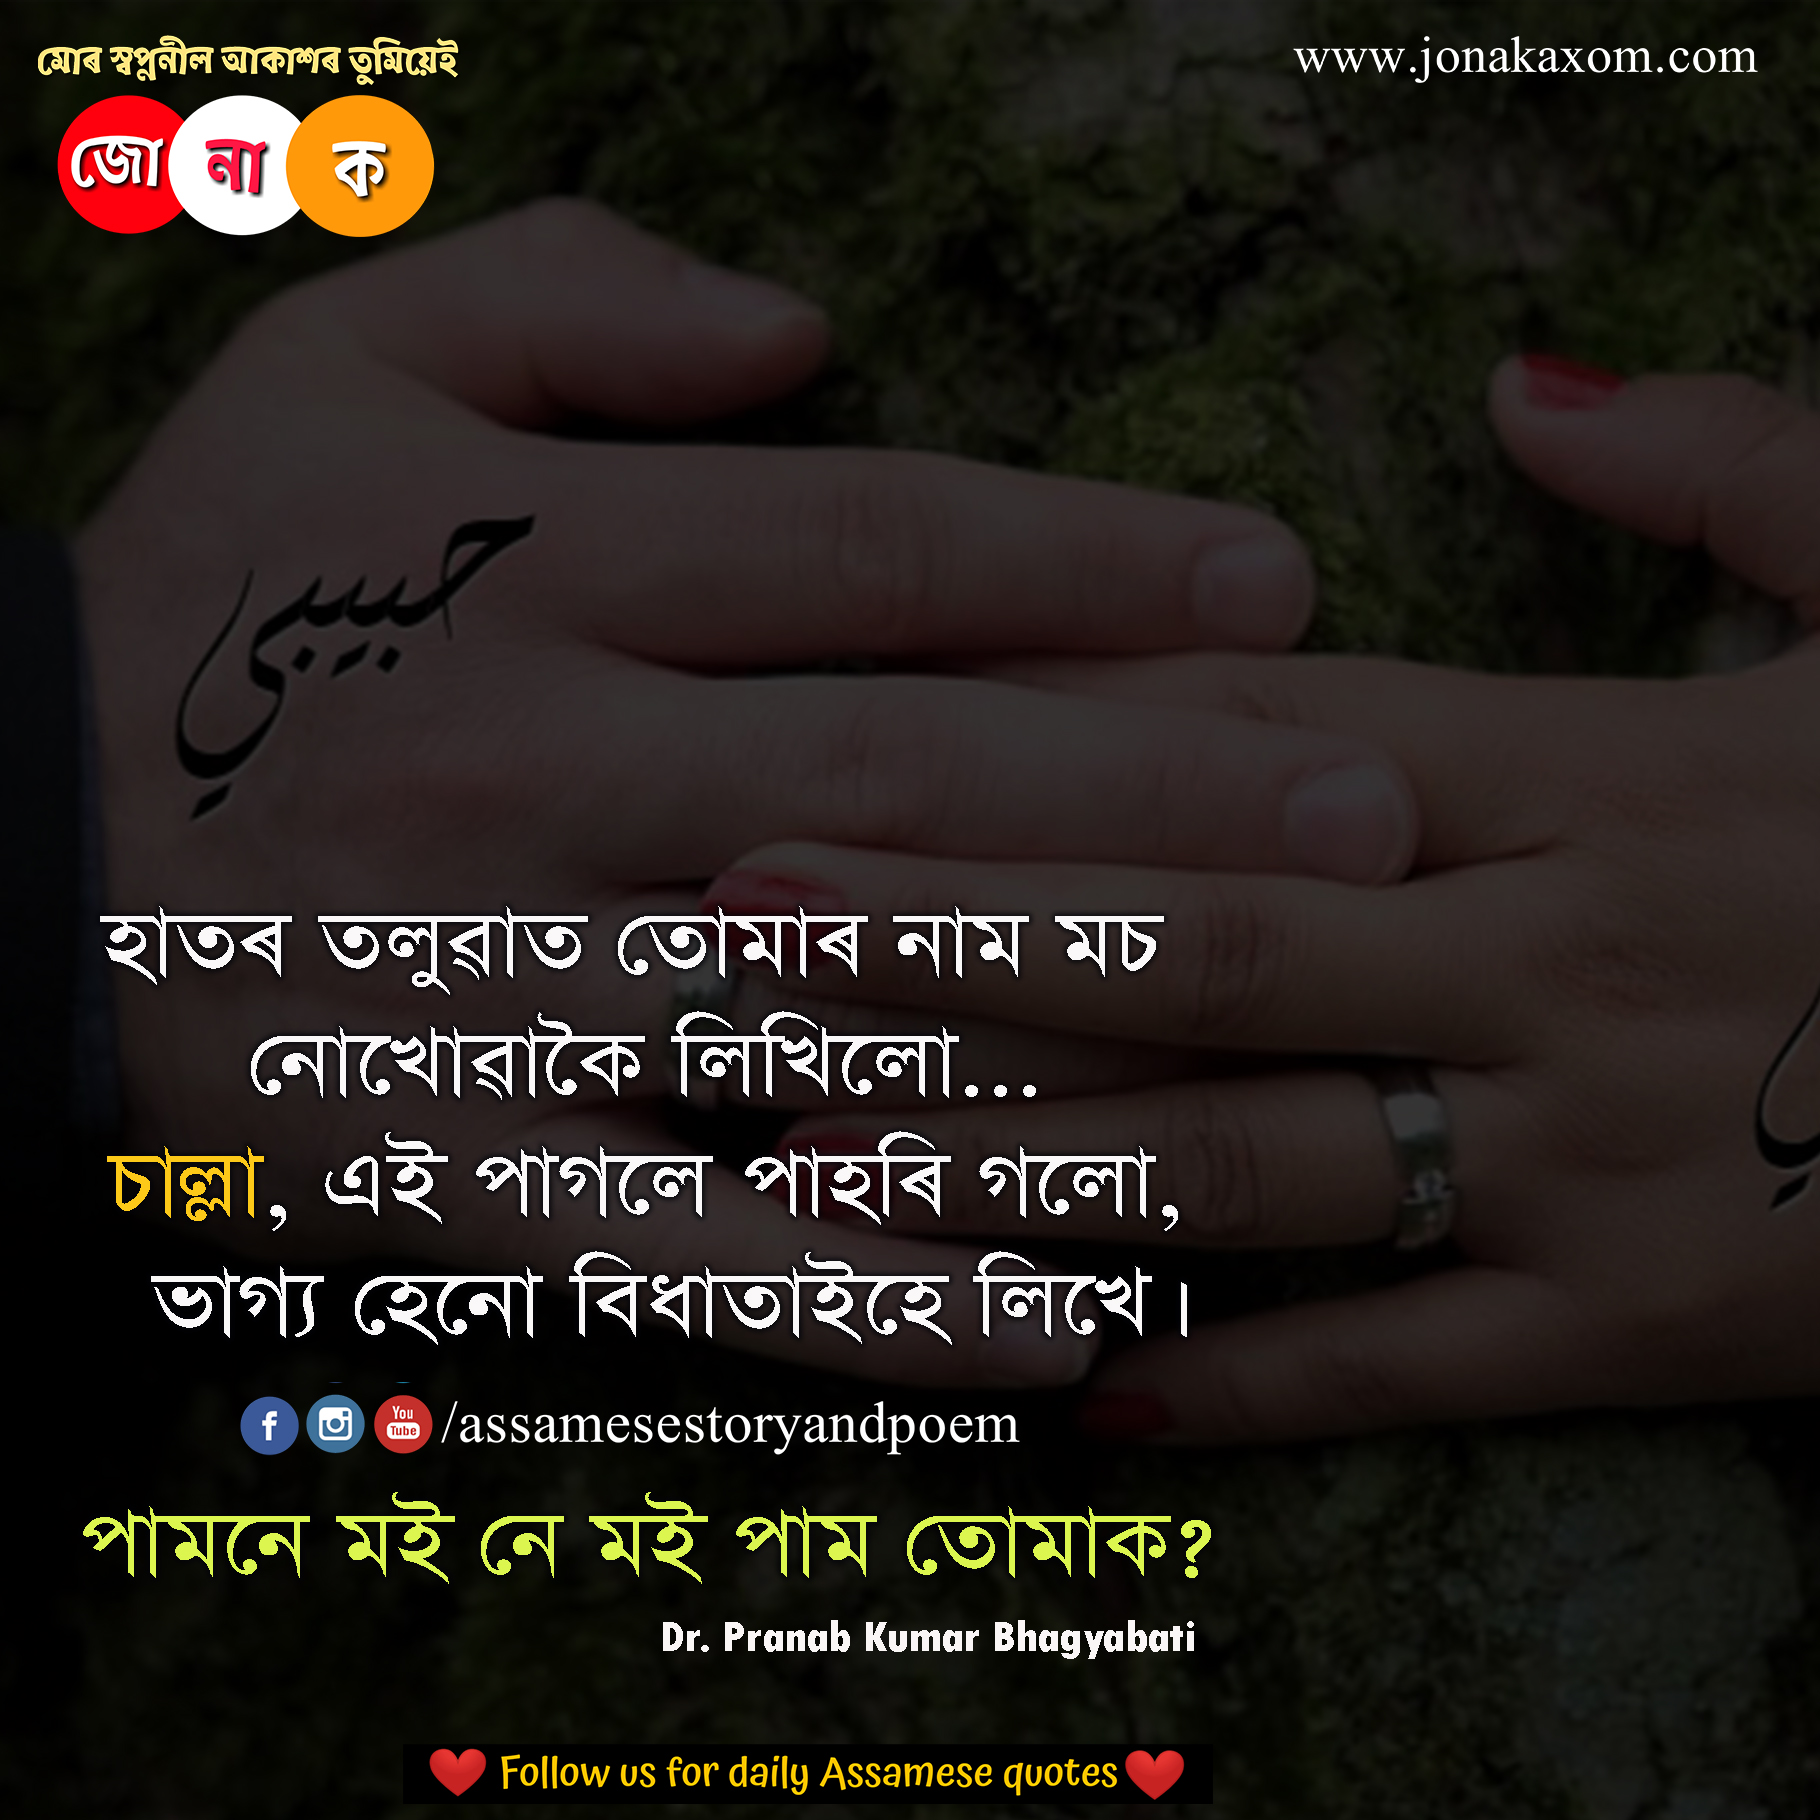 100 Assamese Quotes For Whatsapp Status | Assamese Sad And Romantic Quote  Collection - JonakAxom- Assamese Quotes, Blogging , Business Ideas, Tips  And Tricks